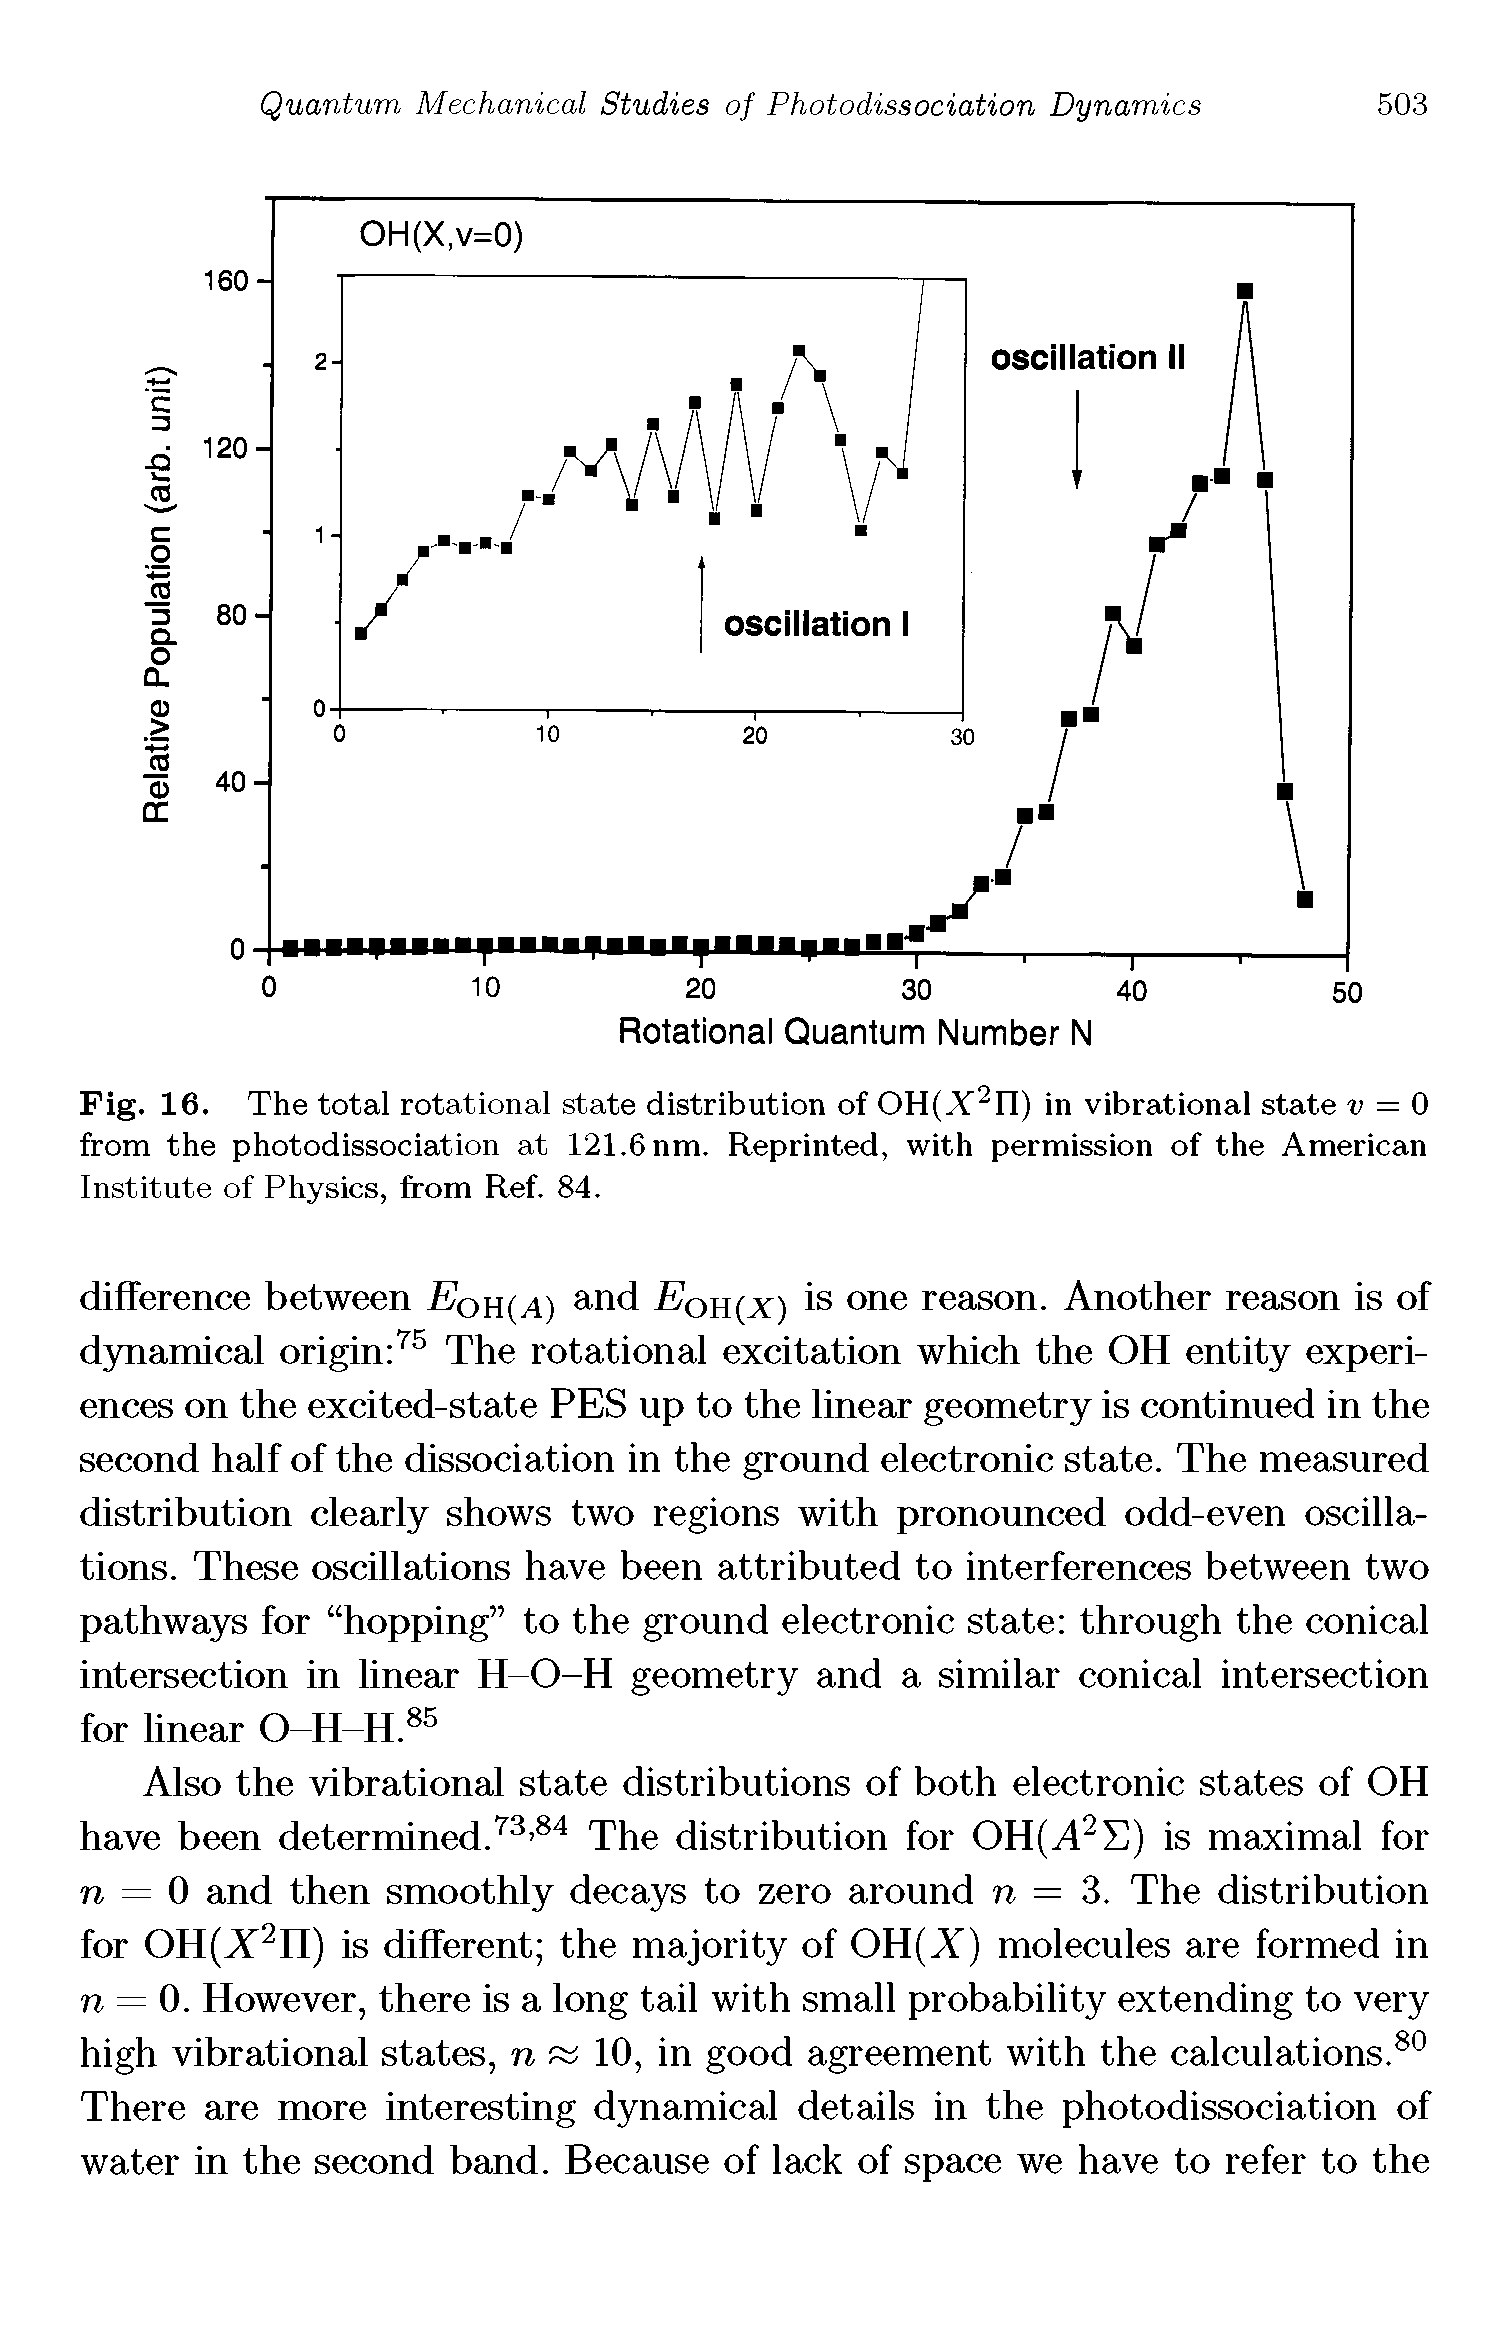 Fig. 16. The total rotational state distribution of OH(X n) in vibrational state i = 0 from the photodissociation at 121.6 nm. Reprinted, with permission of the American Institute of Physics, from Ref. 84.